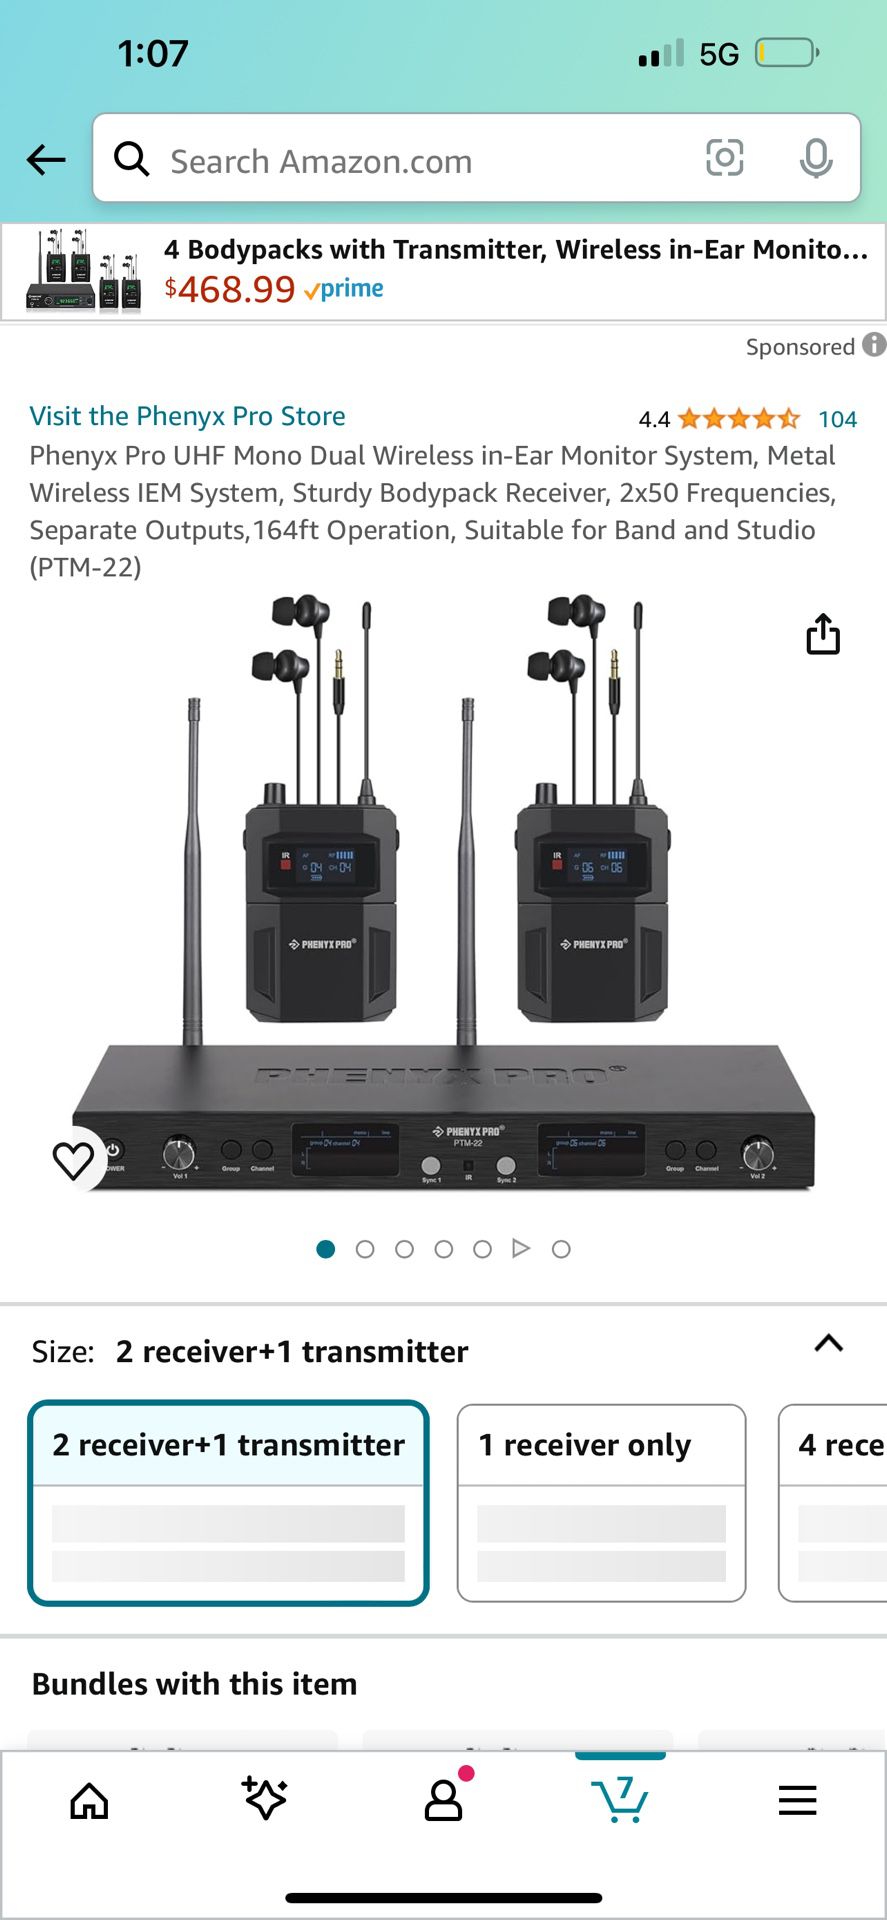 Phenyx Pro UHF Mono Dual Wireless in-Ear Monitor System